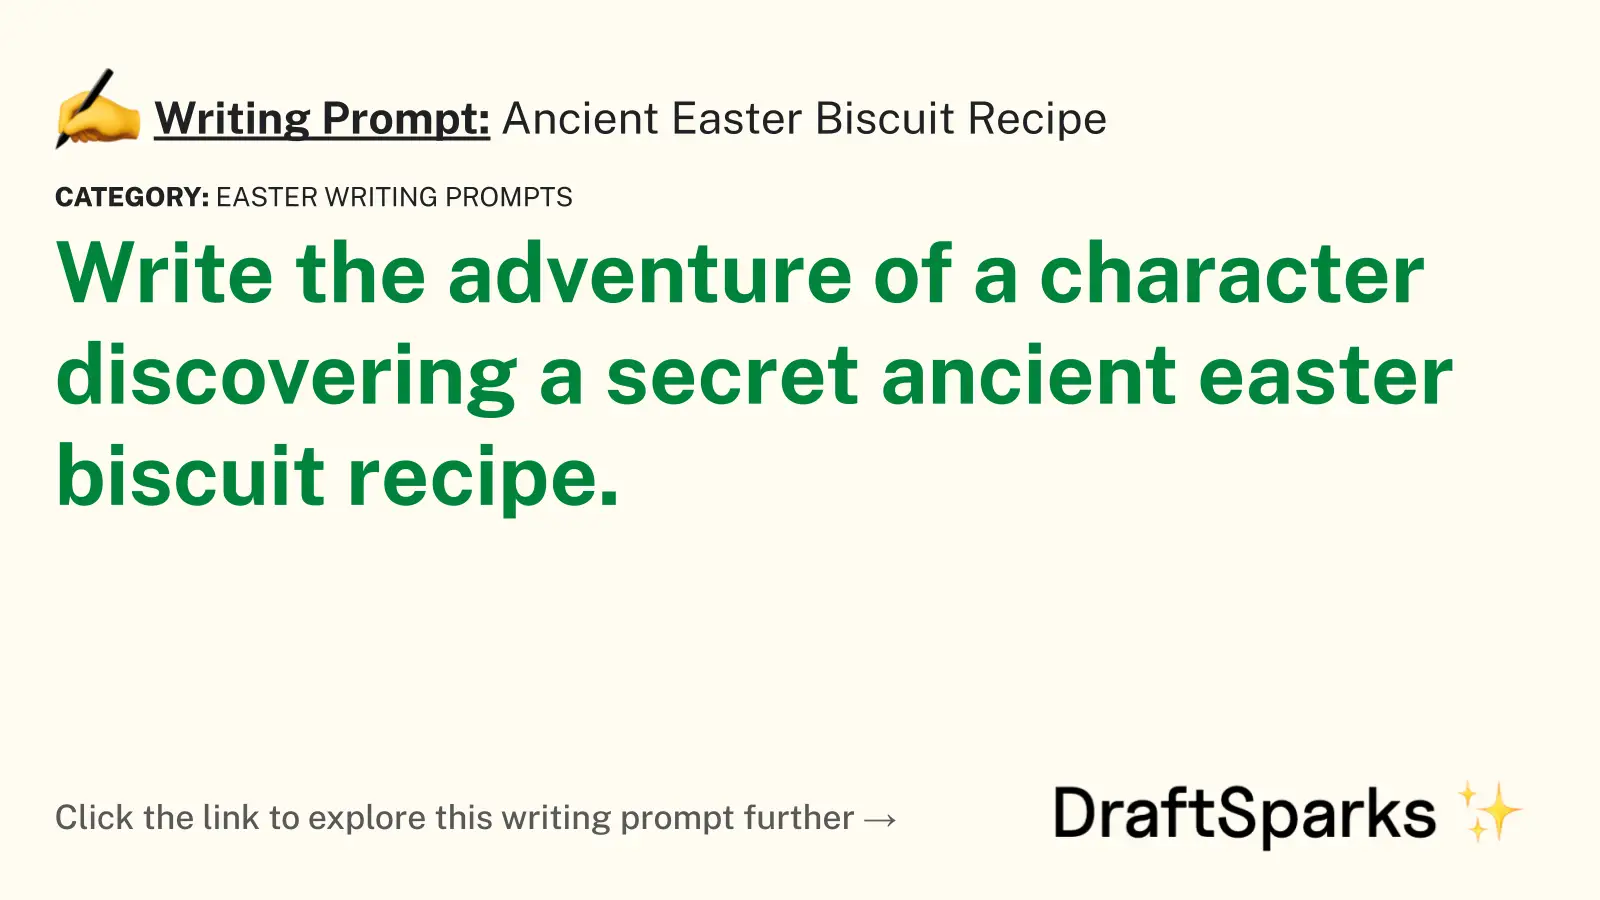 Ancient Easter Biscuit Recipe